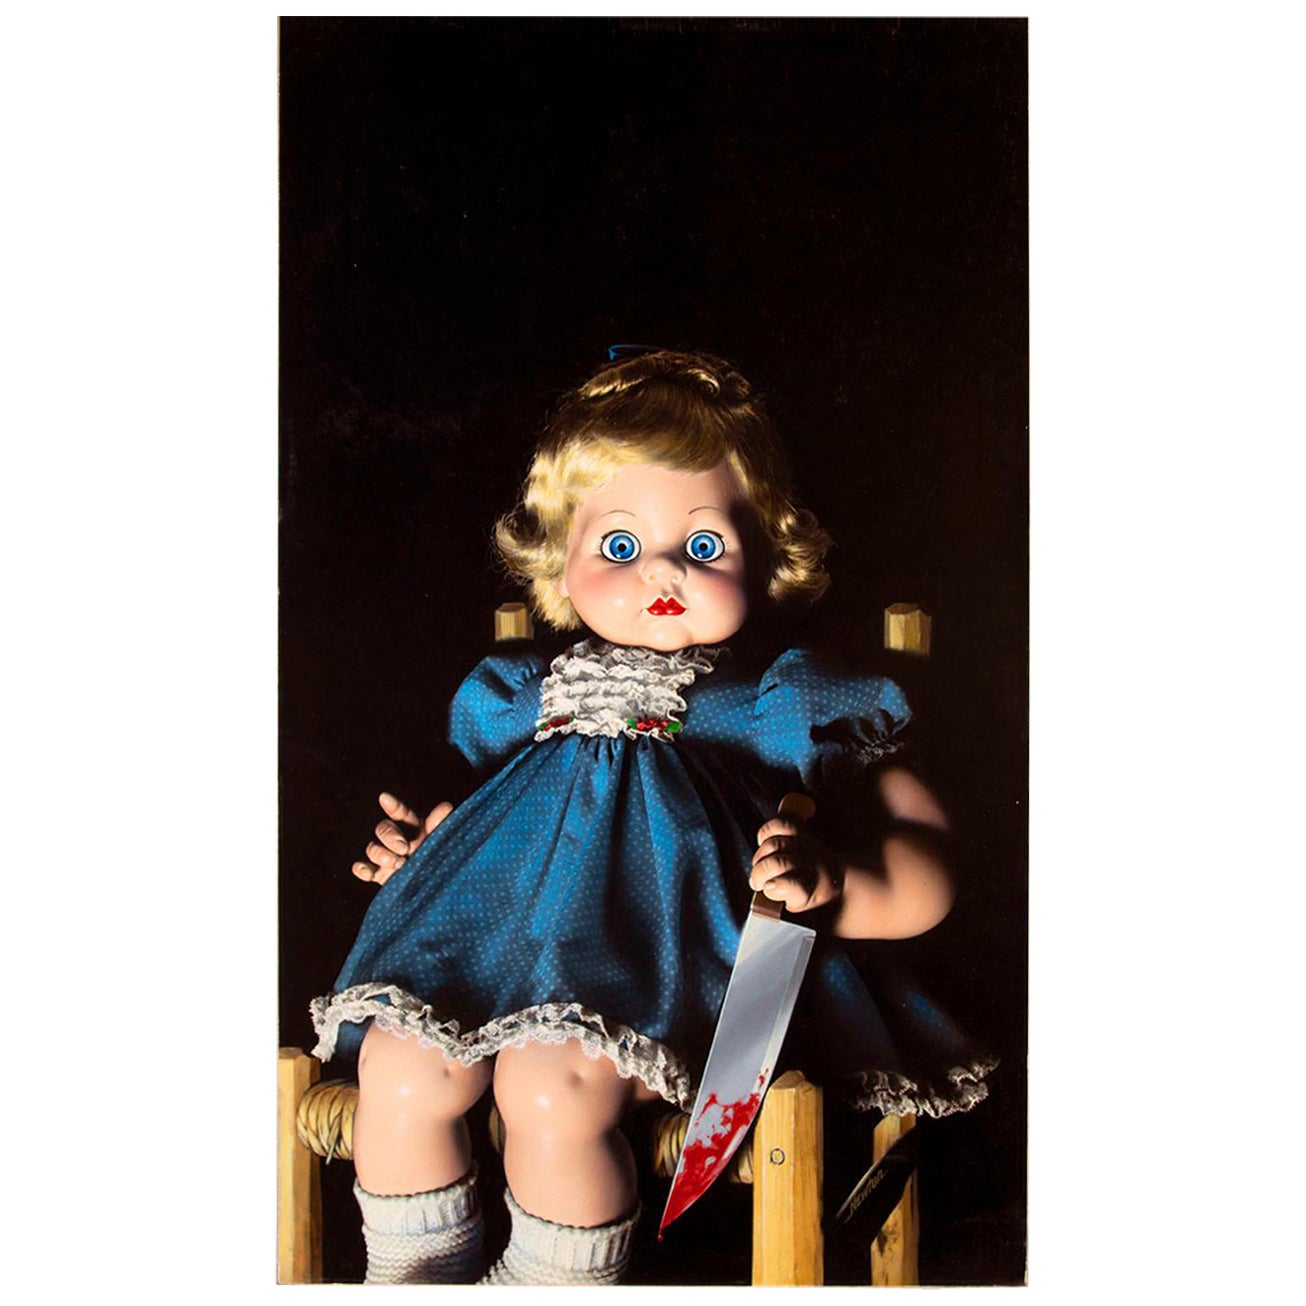 Doll Mixed Media Painting and Original Book Cover For Sale